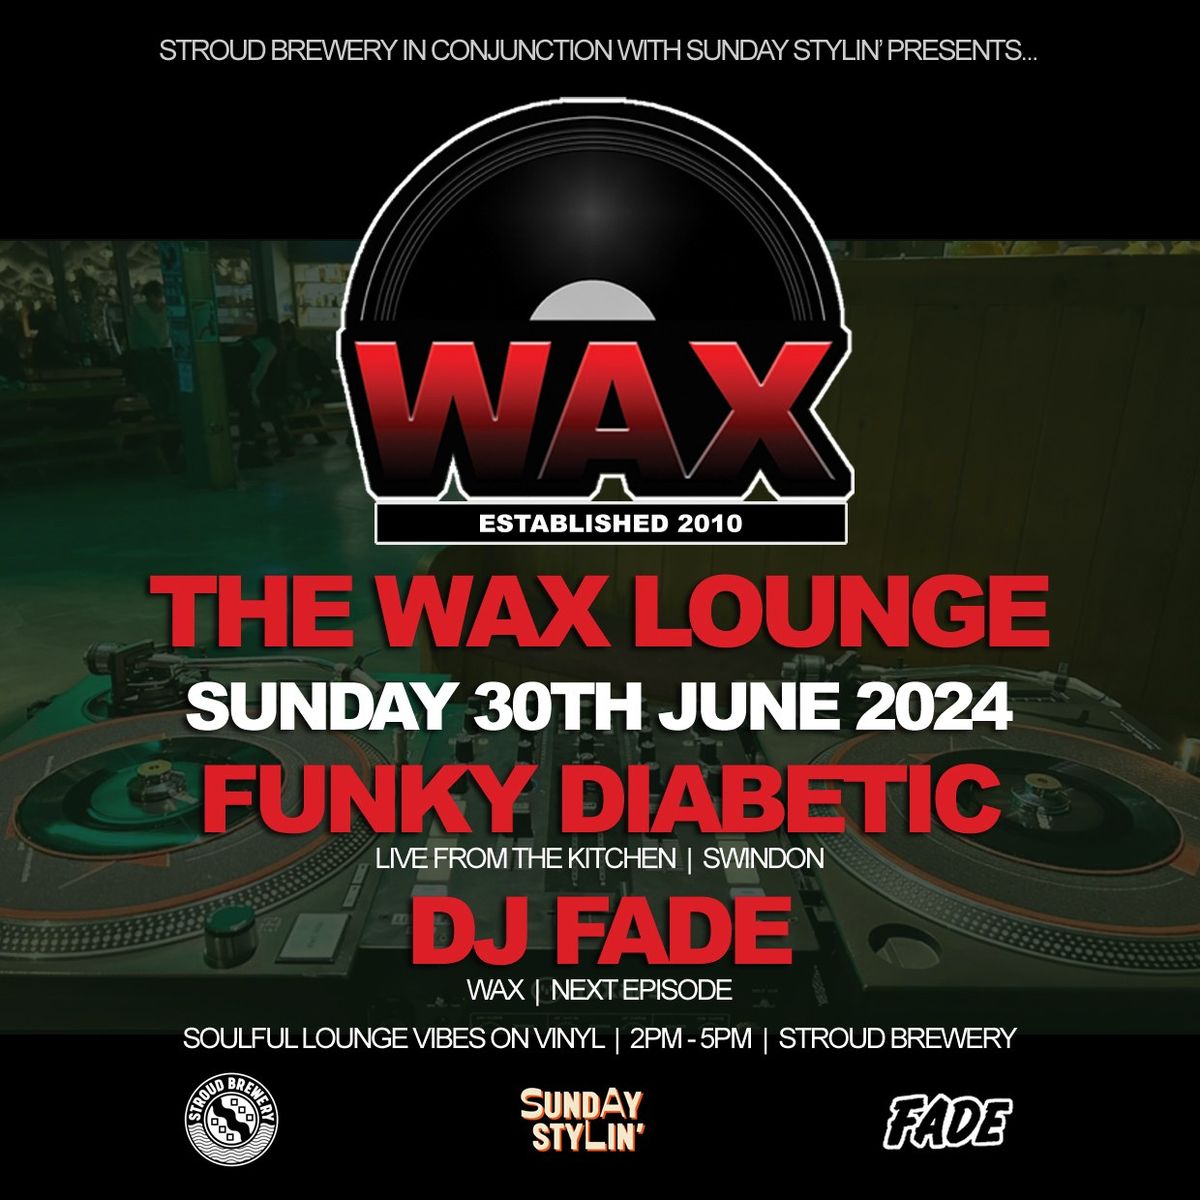 The WAX Lounge - Funky Diabetic - Fade - Stroud Brewery Sunday 30th June 2024!